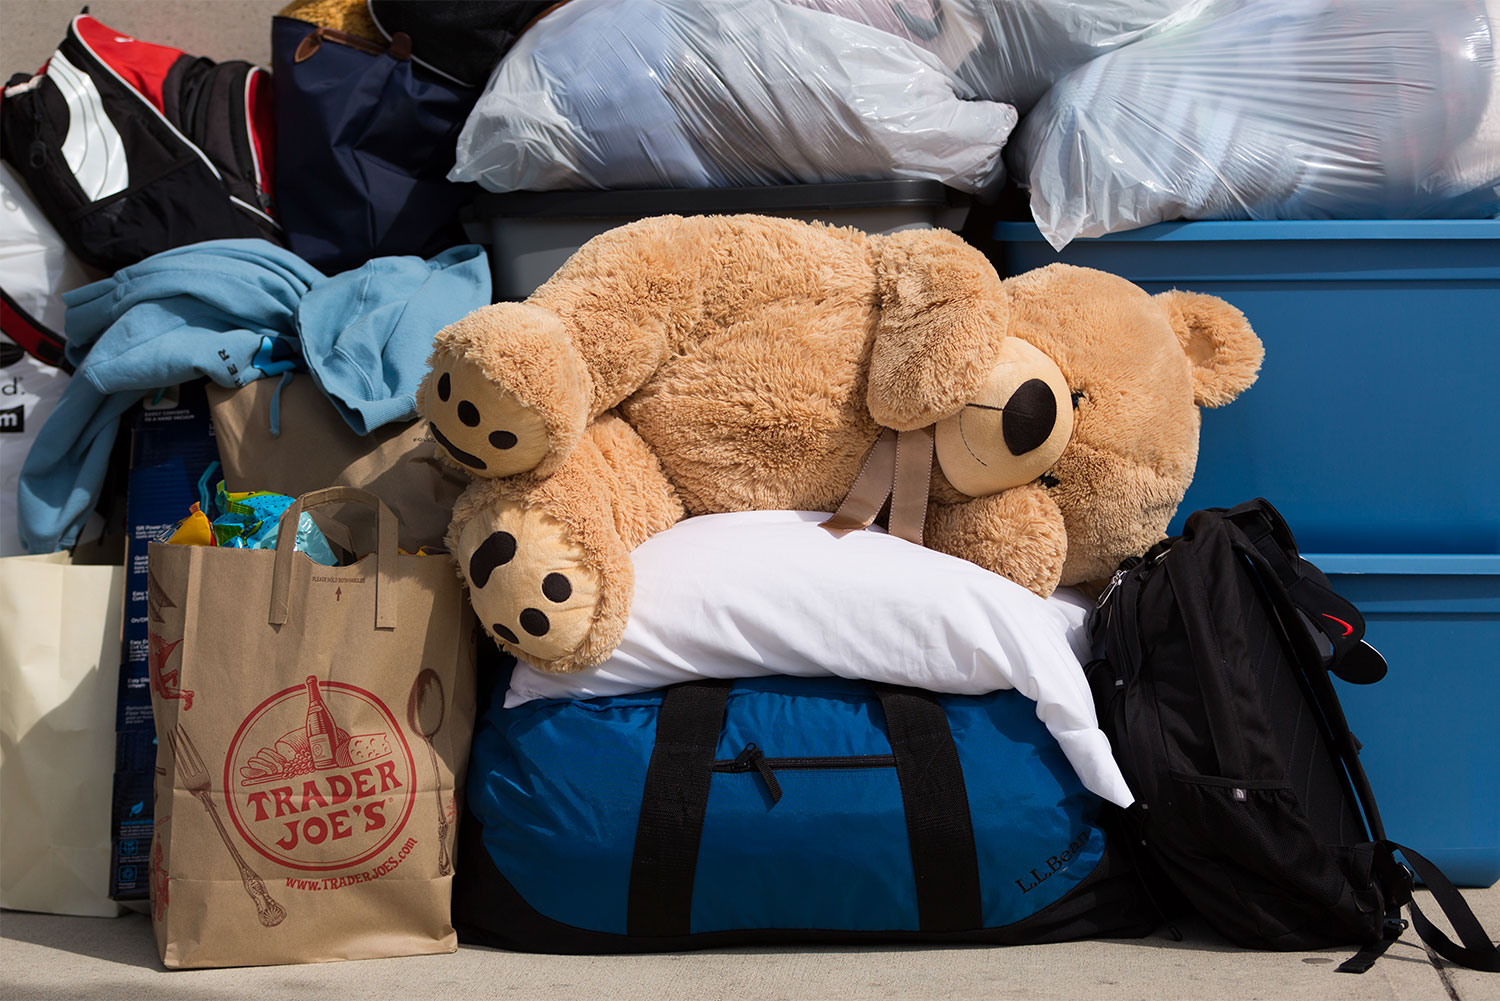 Moving bins, trashbags, duffle bags and stuffed teddy bear sit on a sidewalk outside Boston University dorms during Fall semester student move-in.